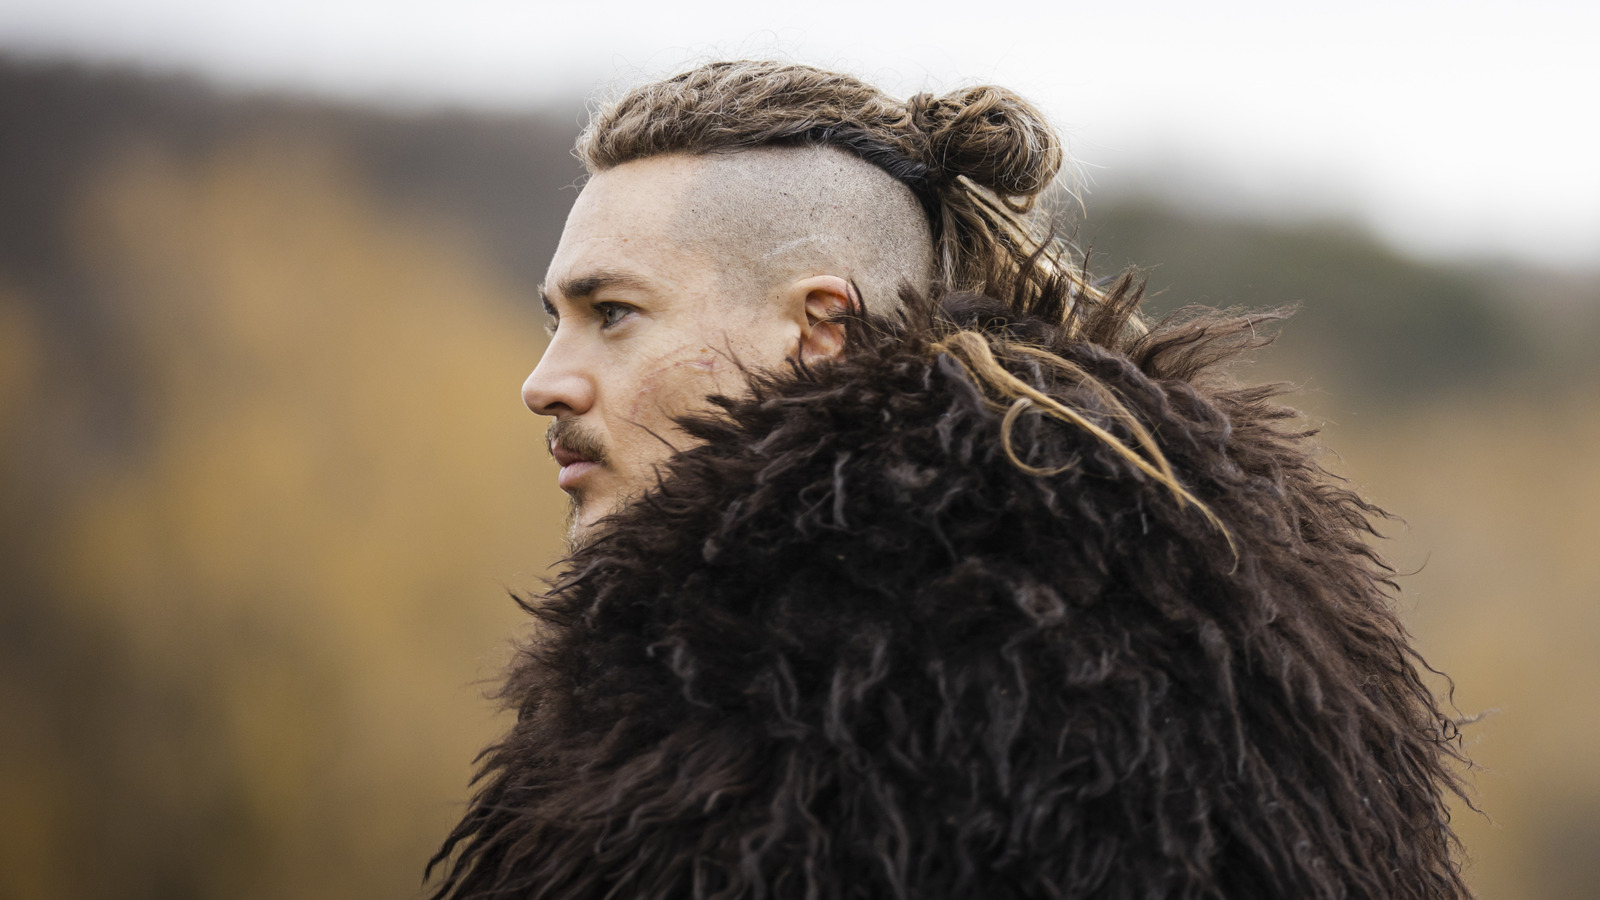 Last Kingdom Is Over, & Medieval TV Is Ready For The Rise Of William The Conqueror – Looper